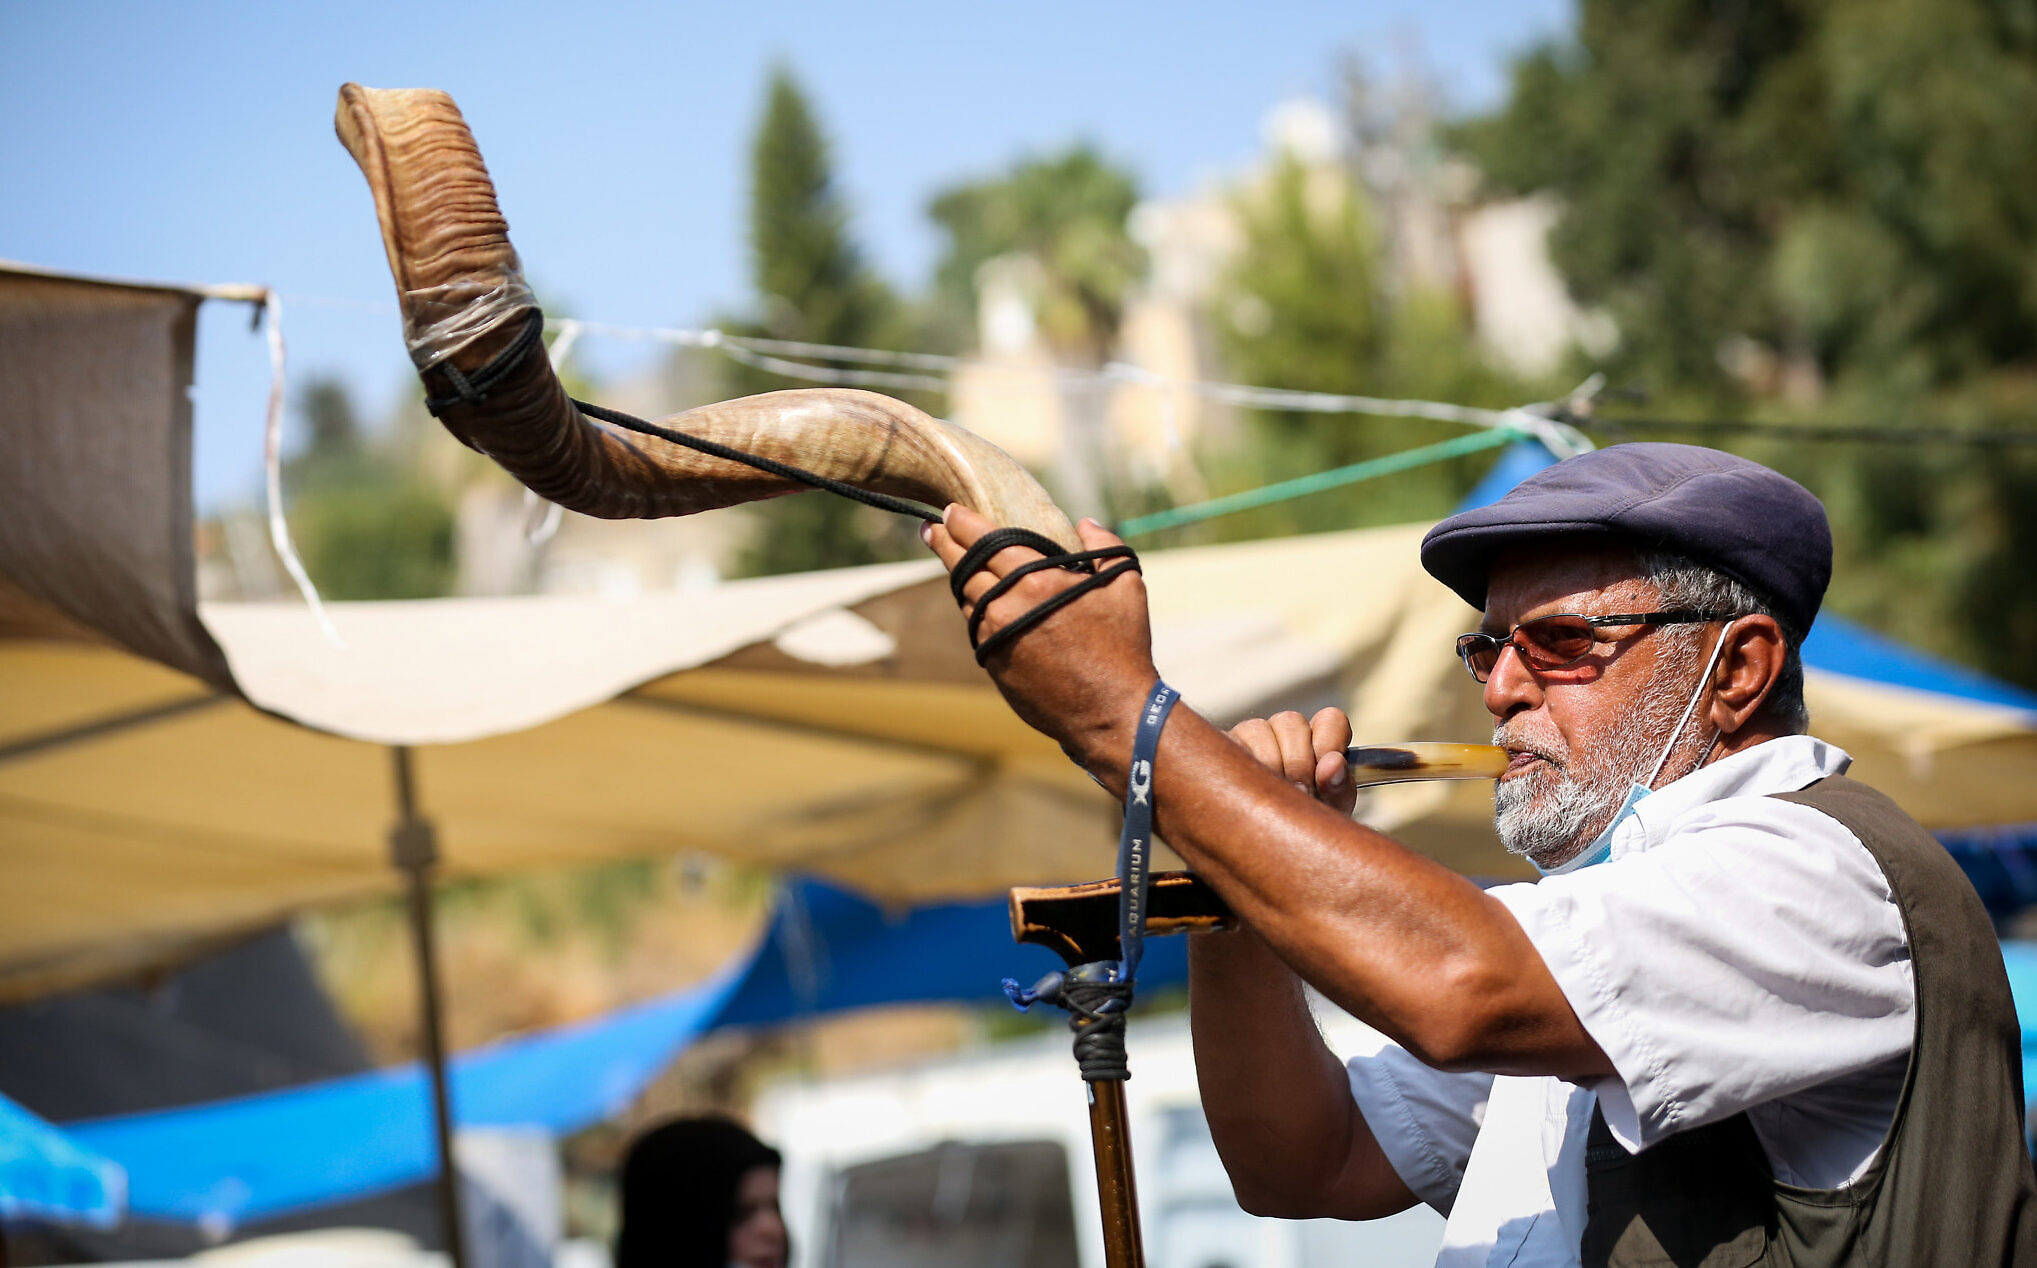 How To Toot Your Horn Israels Health Ministry Issues Shofar Blowing Guidelines The Times Of